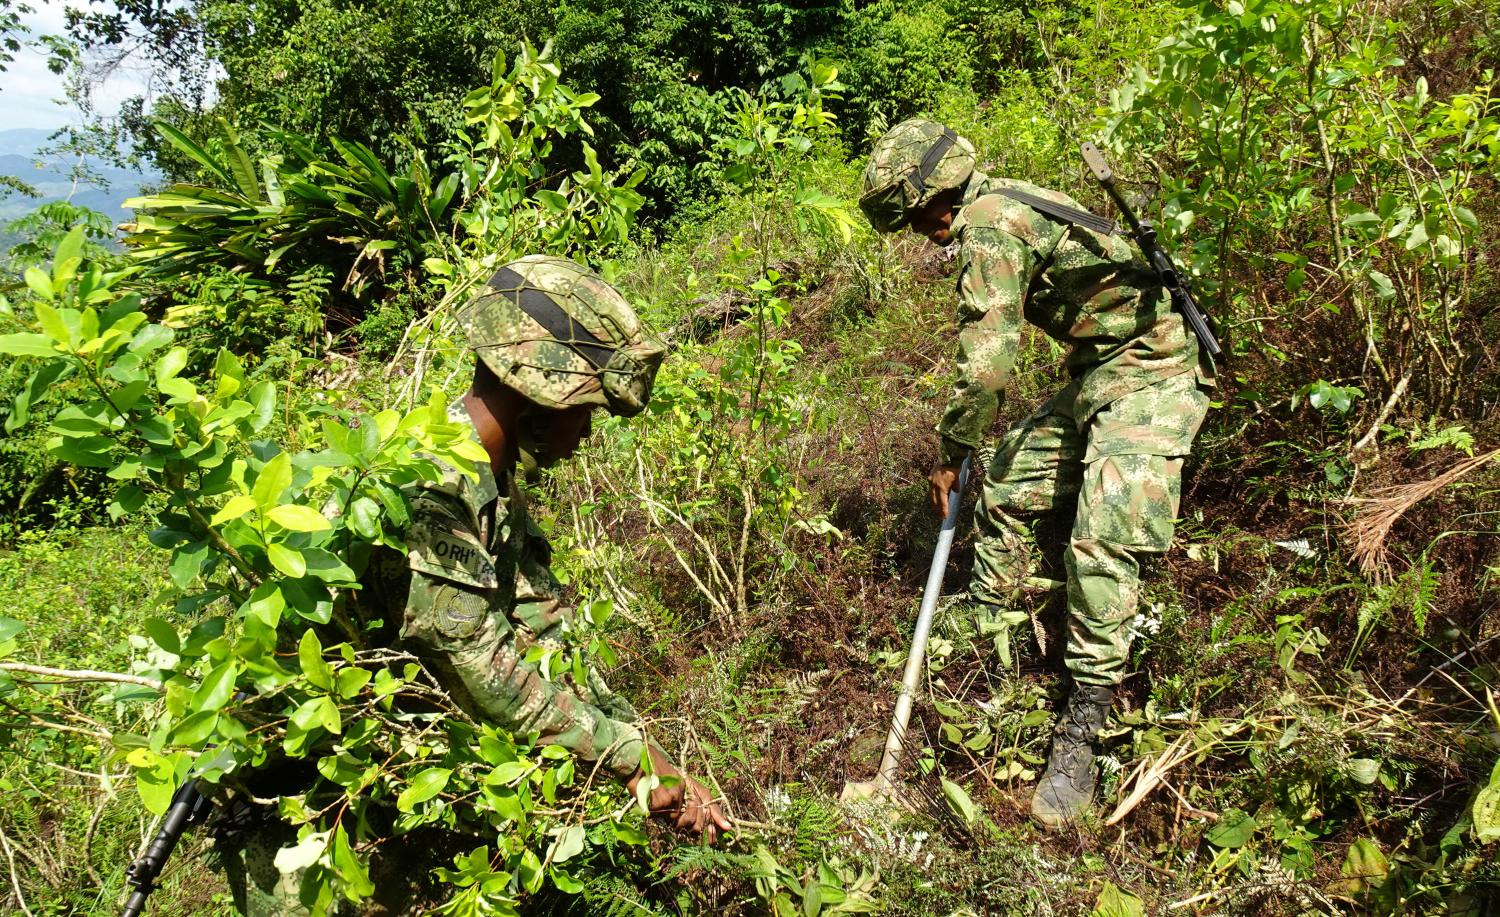 Soldiers of the Colombian National Army destroy coca plants during an eradication operation at a plantation in Taraza, Antioquia province, Colombia September 10, 2019. Picture taken September 10. 2019. REUTERS/Luis Jaime Acosta - RC1D4B04F620